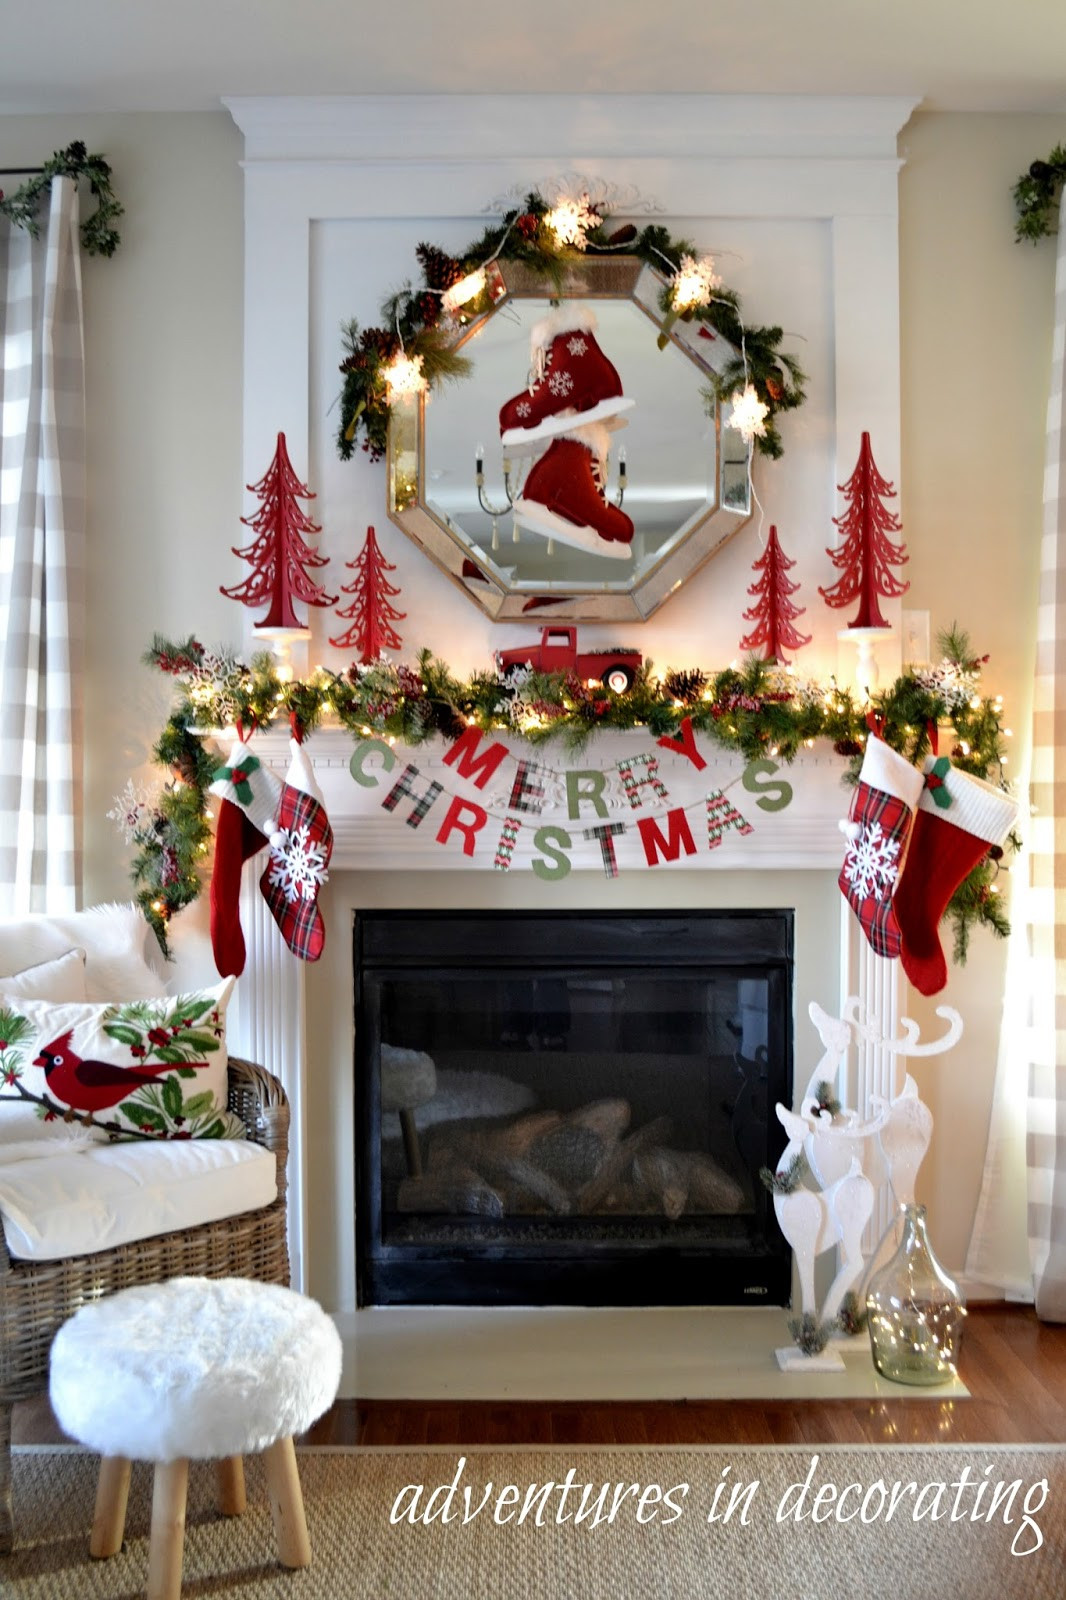 Fireplace Decorations For Christmas
 Adventures in Decorating Our Christmas Great Room Mantel